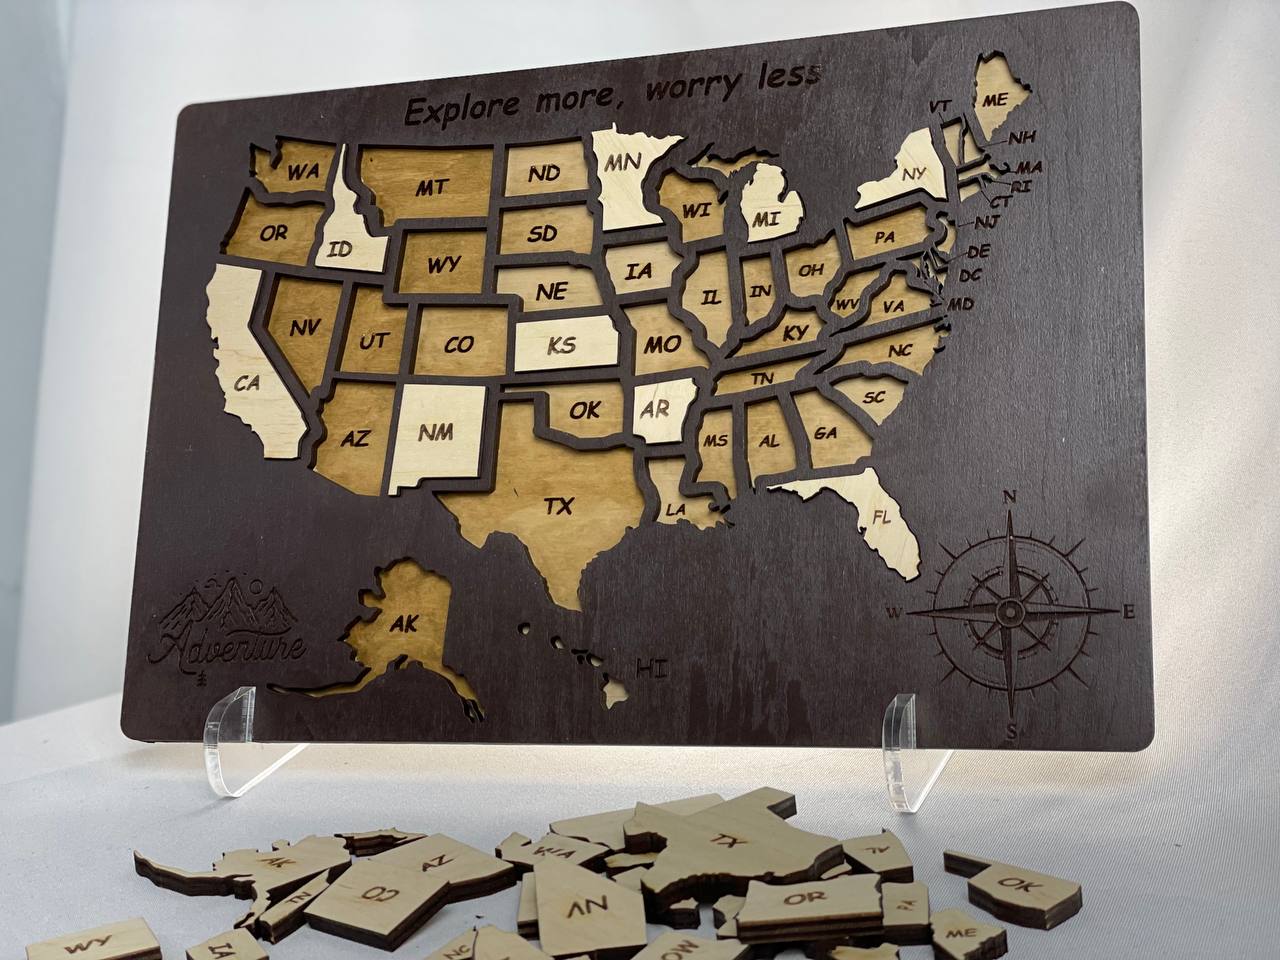 usa-map-travel-map-wooden-united-states-color-brown